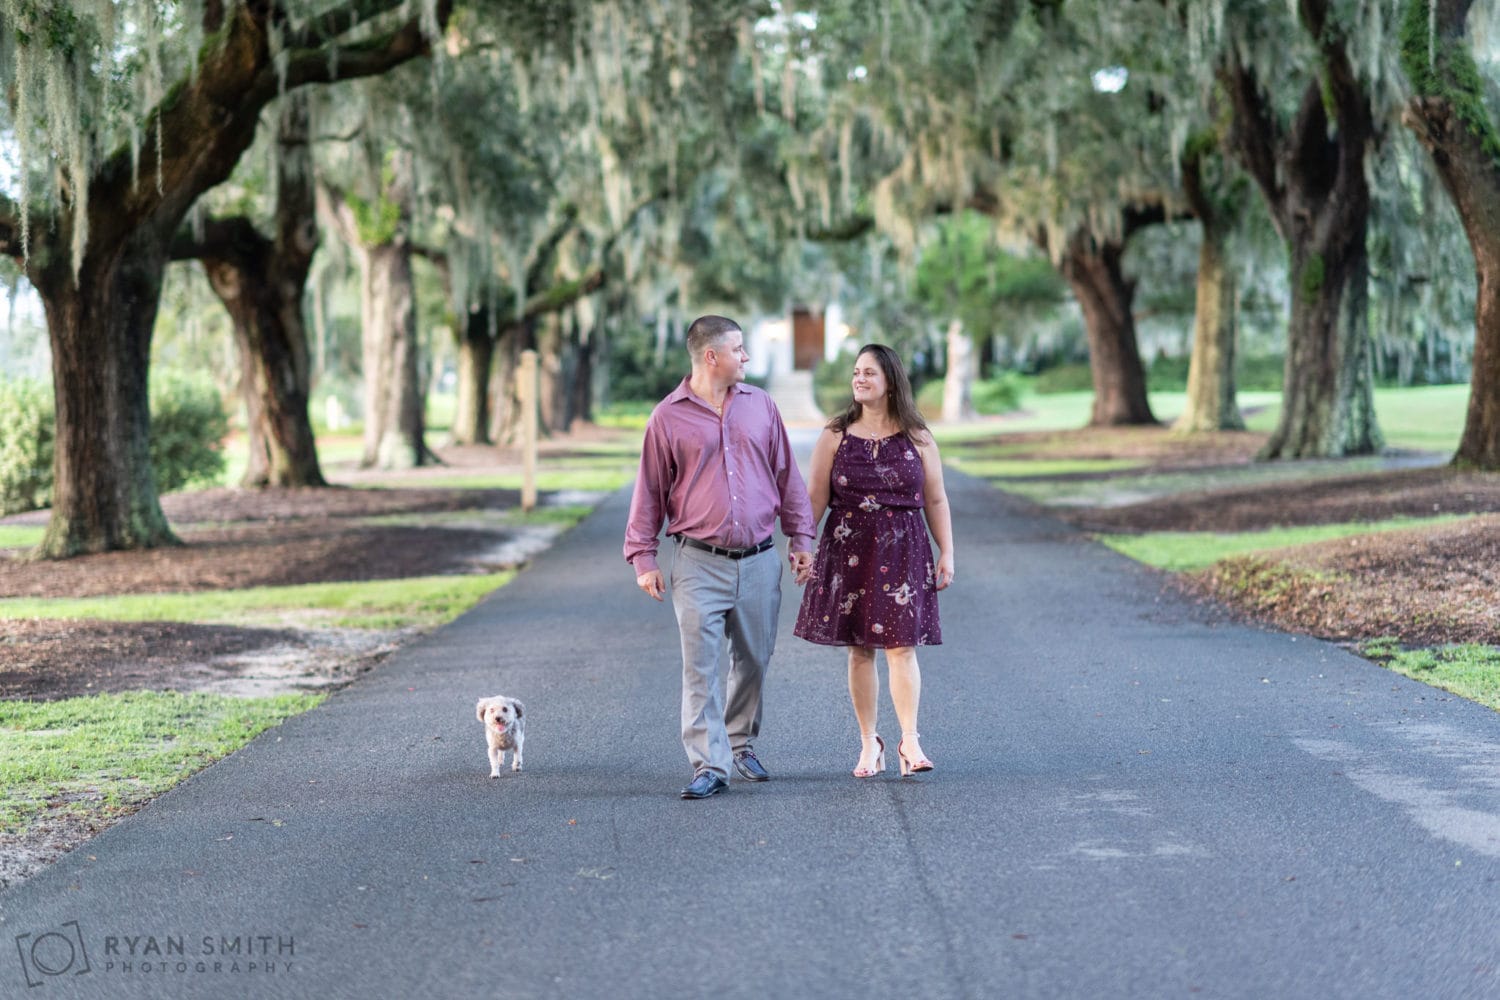 Engagement pictures at Caledonia with a little dog - Caledonia Golf & Fish Club